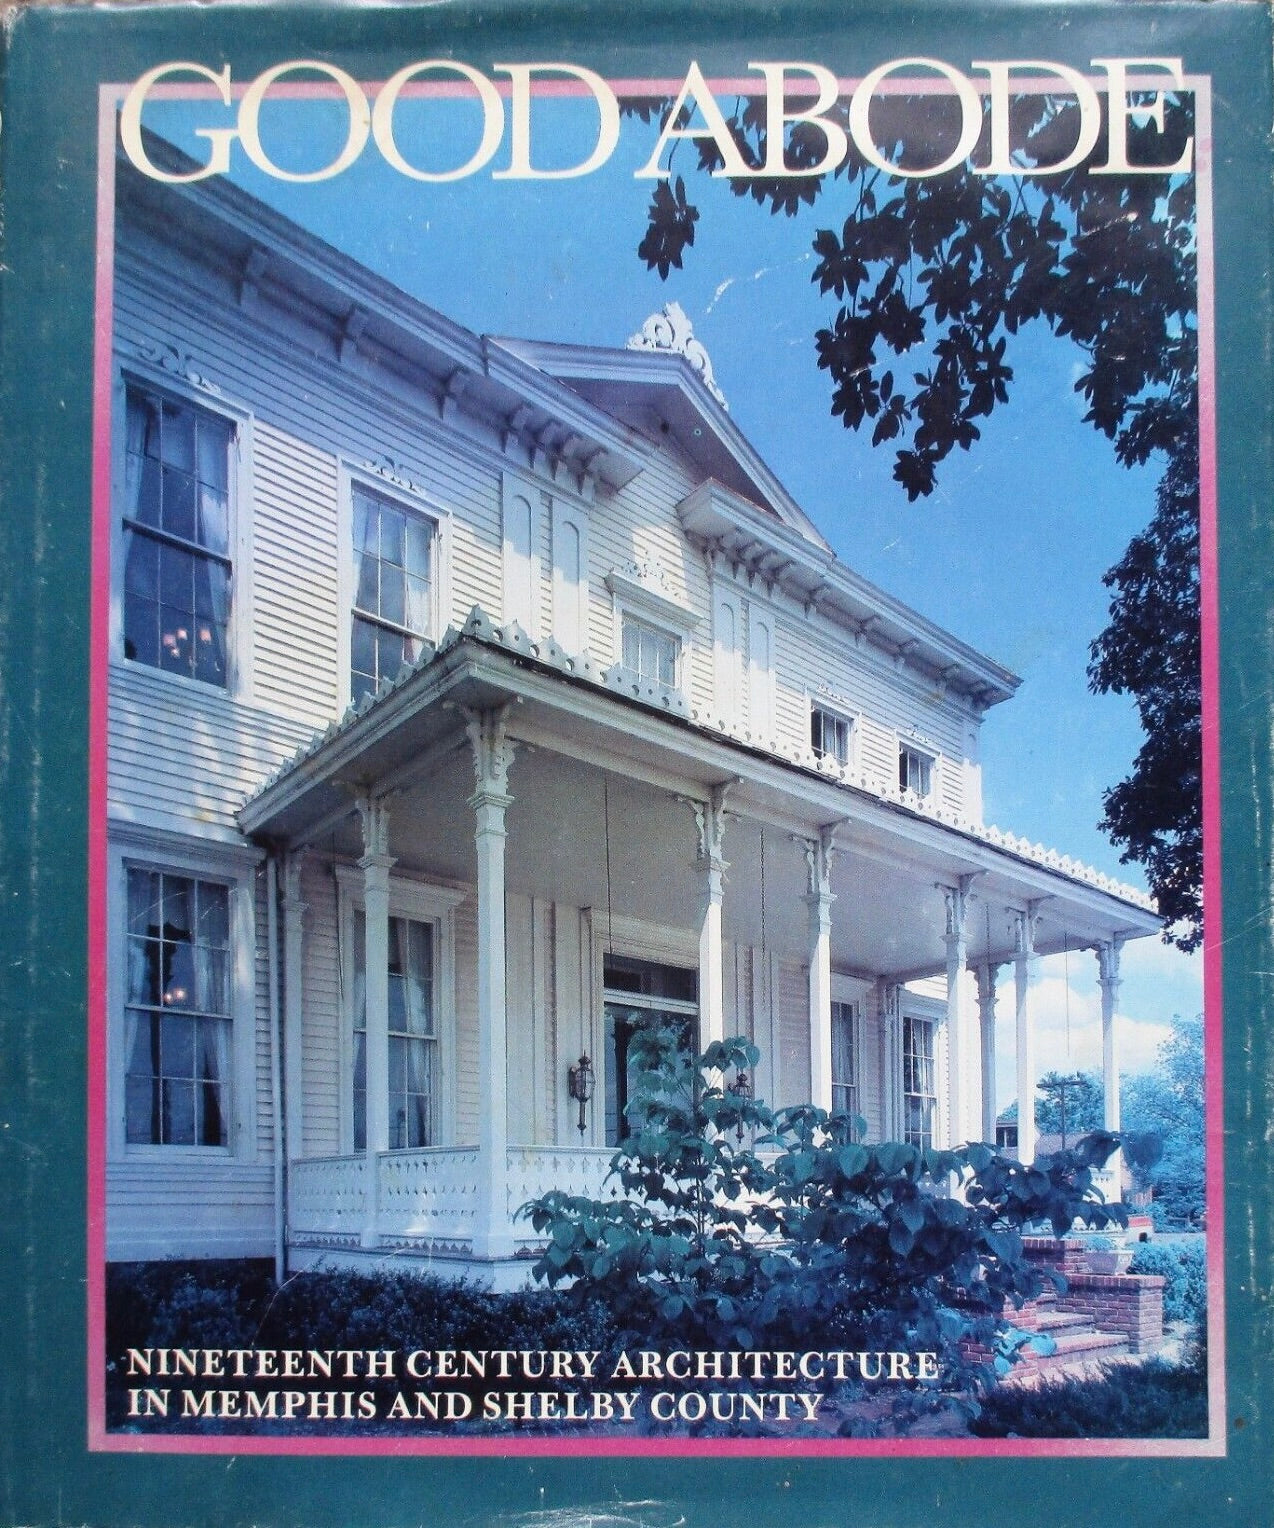 Good Abode: 19th Century Architecture in Memphis and Shelby County, Tennessee